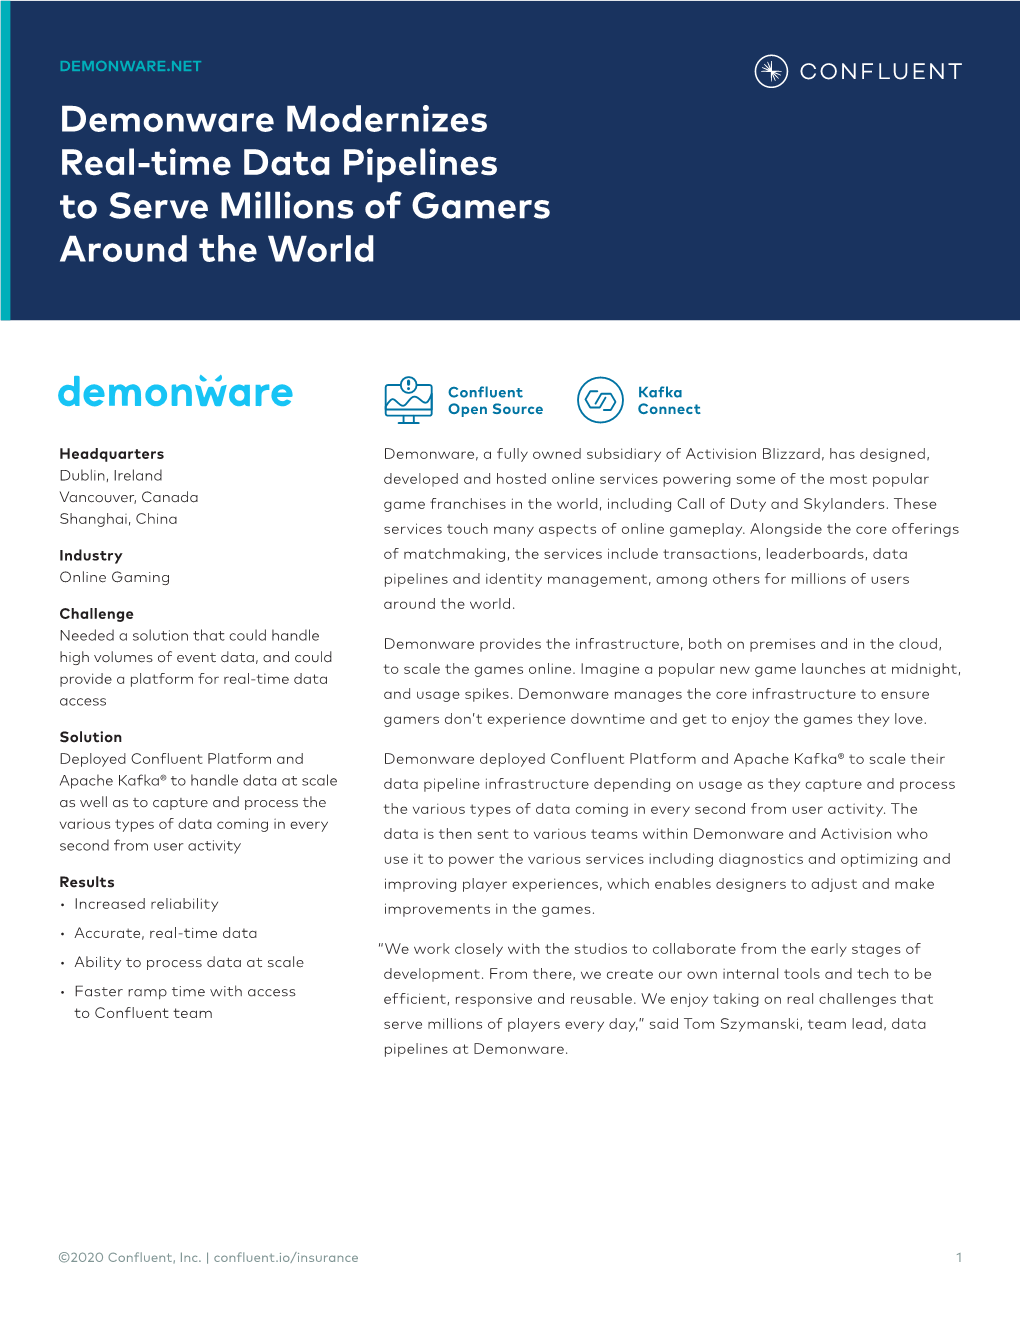 Demonware Modernizes Real-Time Data Pipelines to Serve Millions of Gamers Around the World